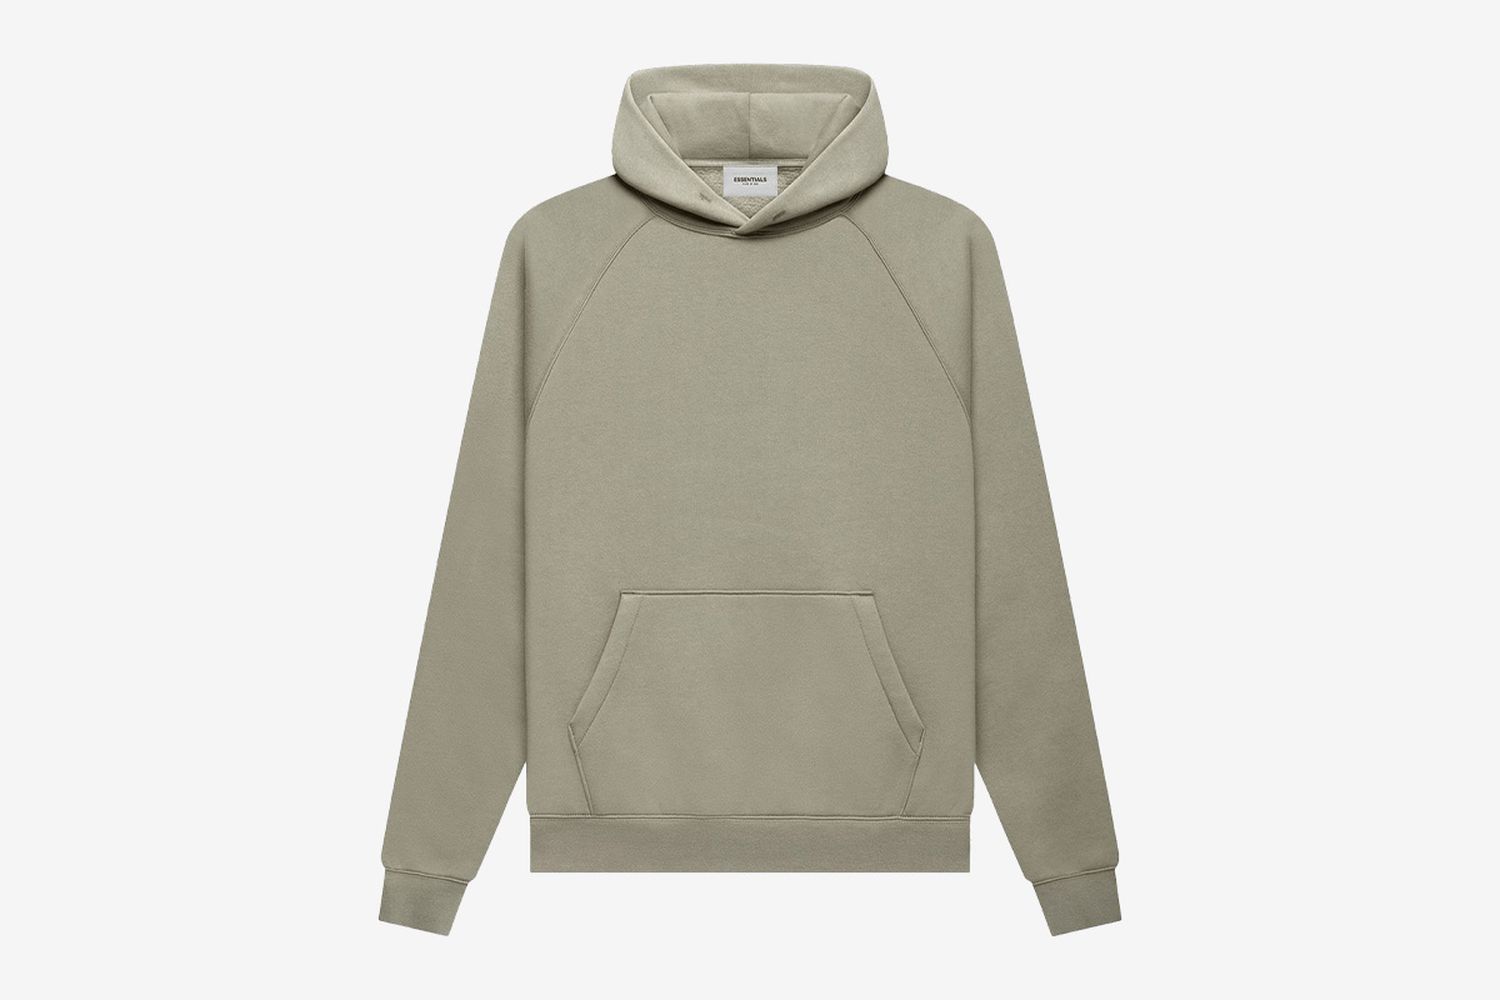 Fear of God ESSENTIALS SS22: Where to Buy & Prices